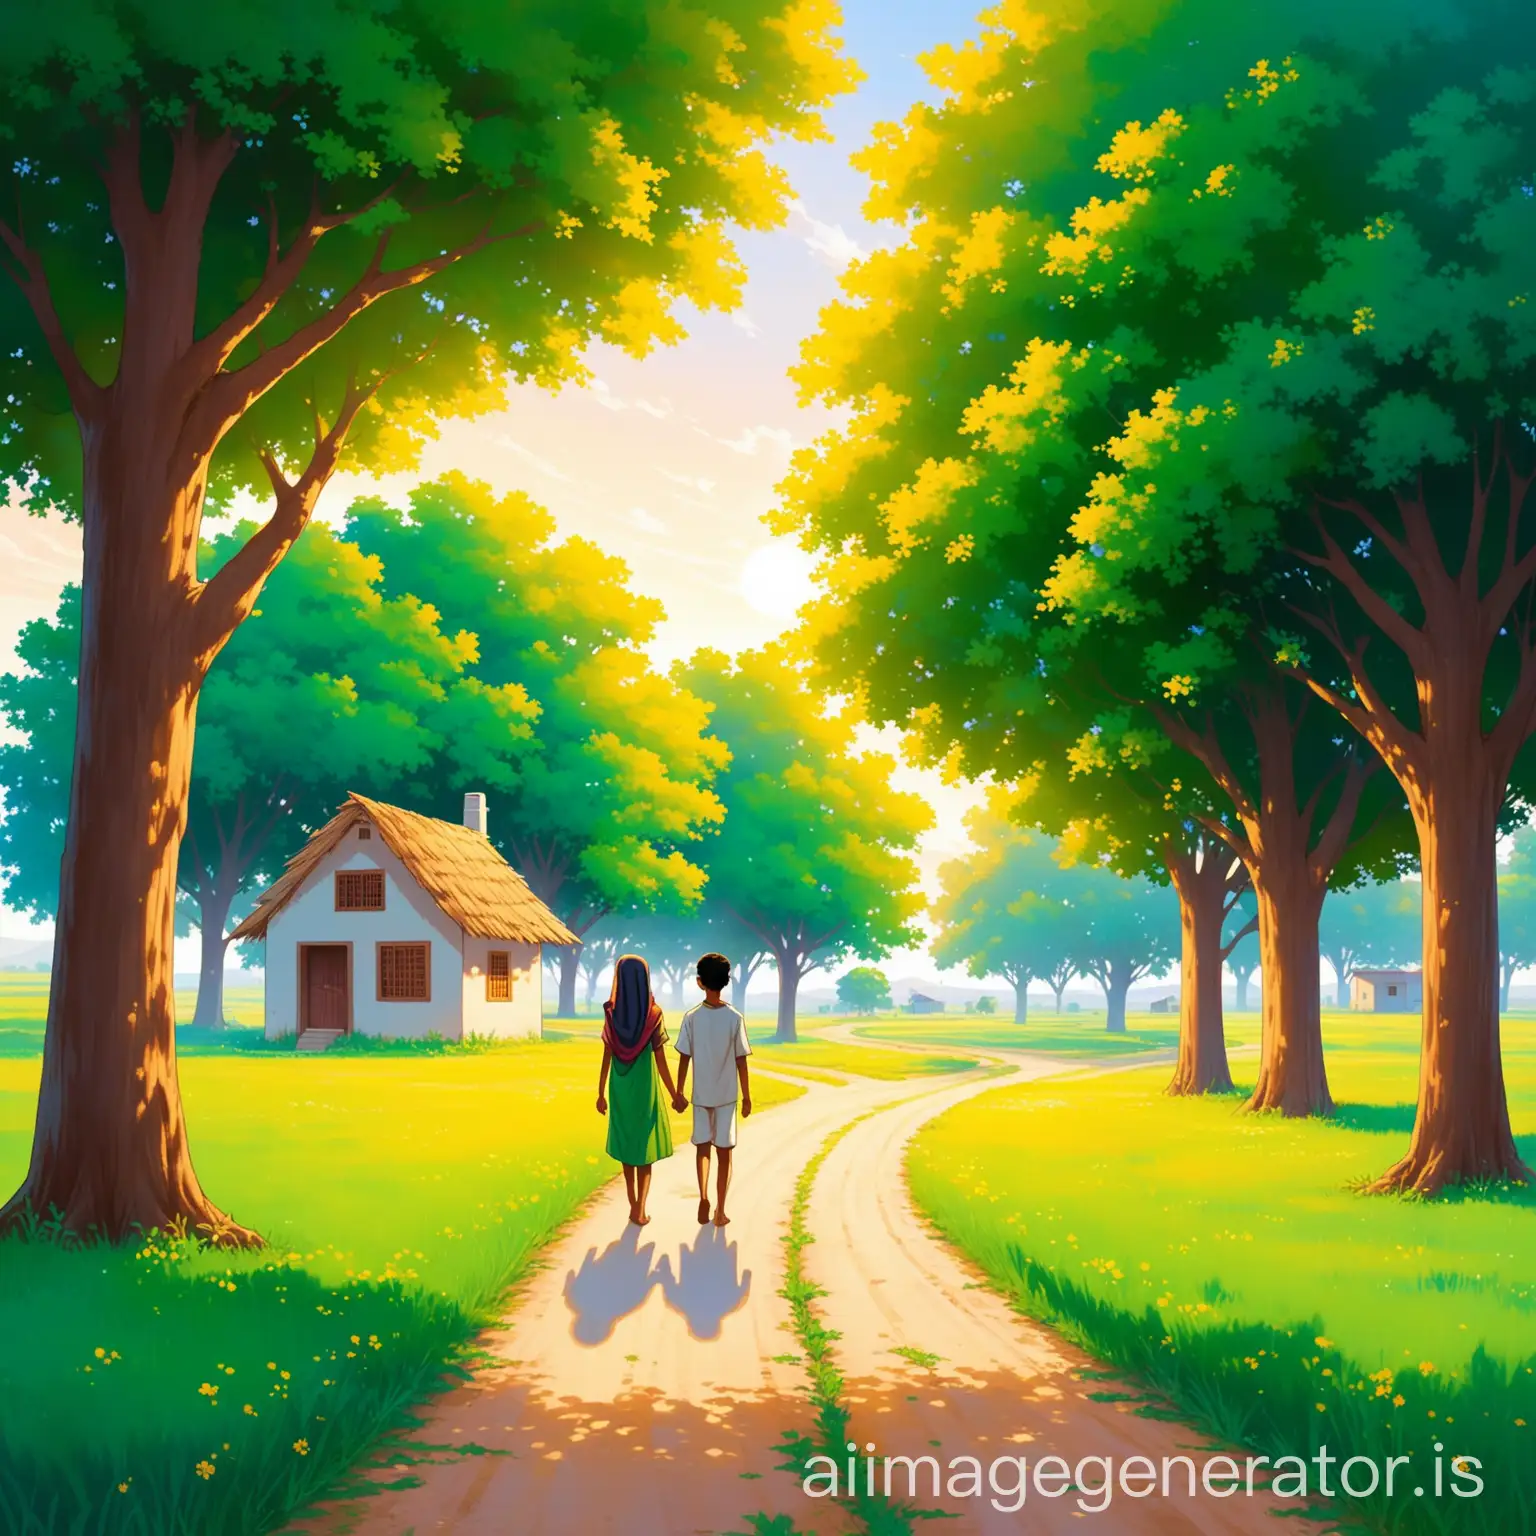 In a small town far away, there were two friends named Maya and Ahmed. They lived in two houses opposite one another along a road that ran through green fields and under large trees.